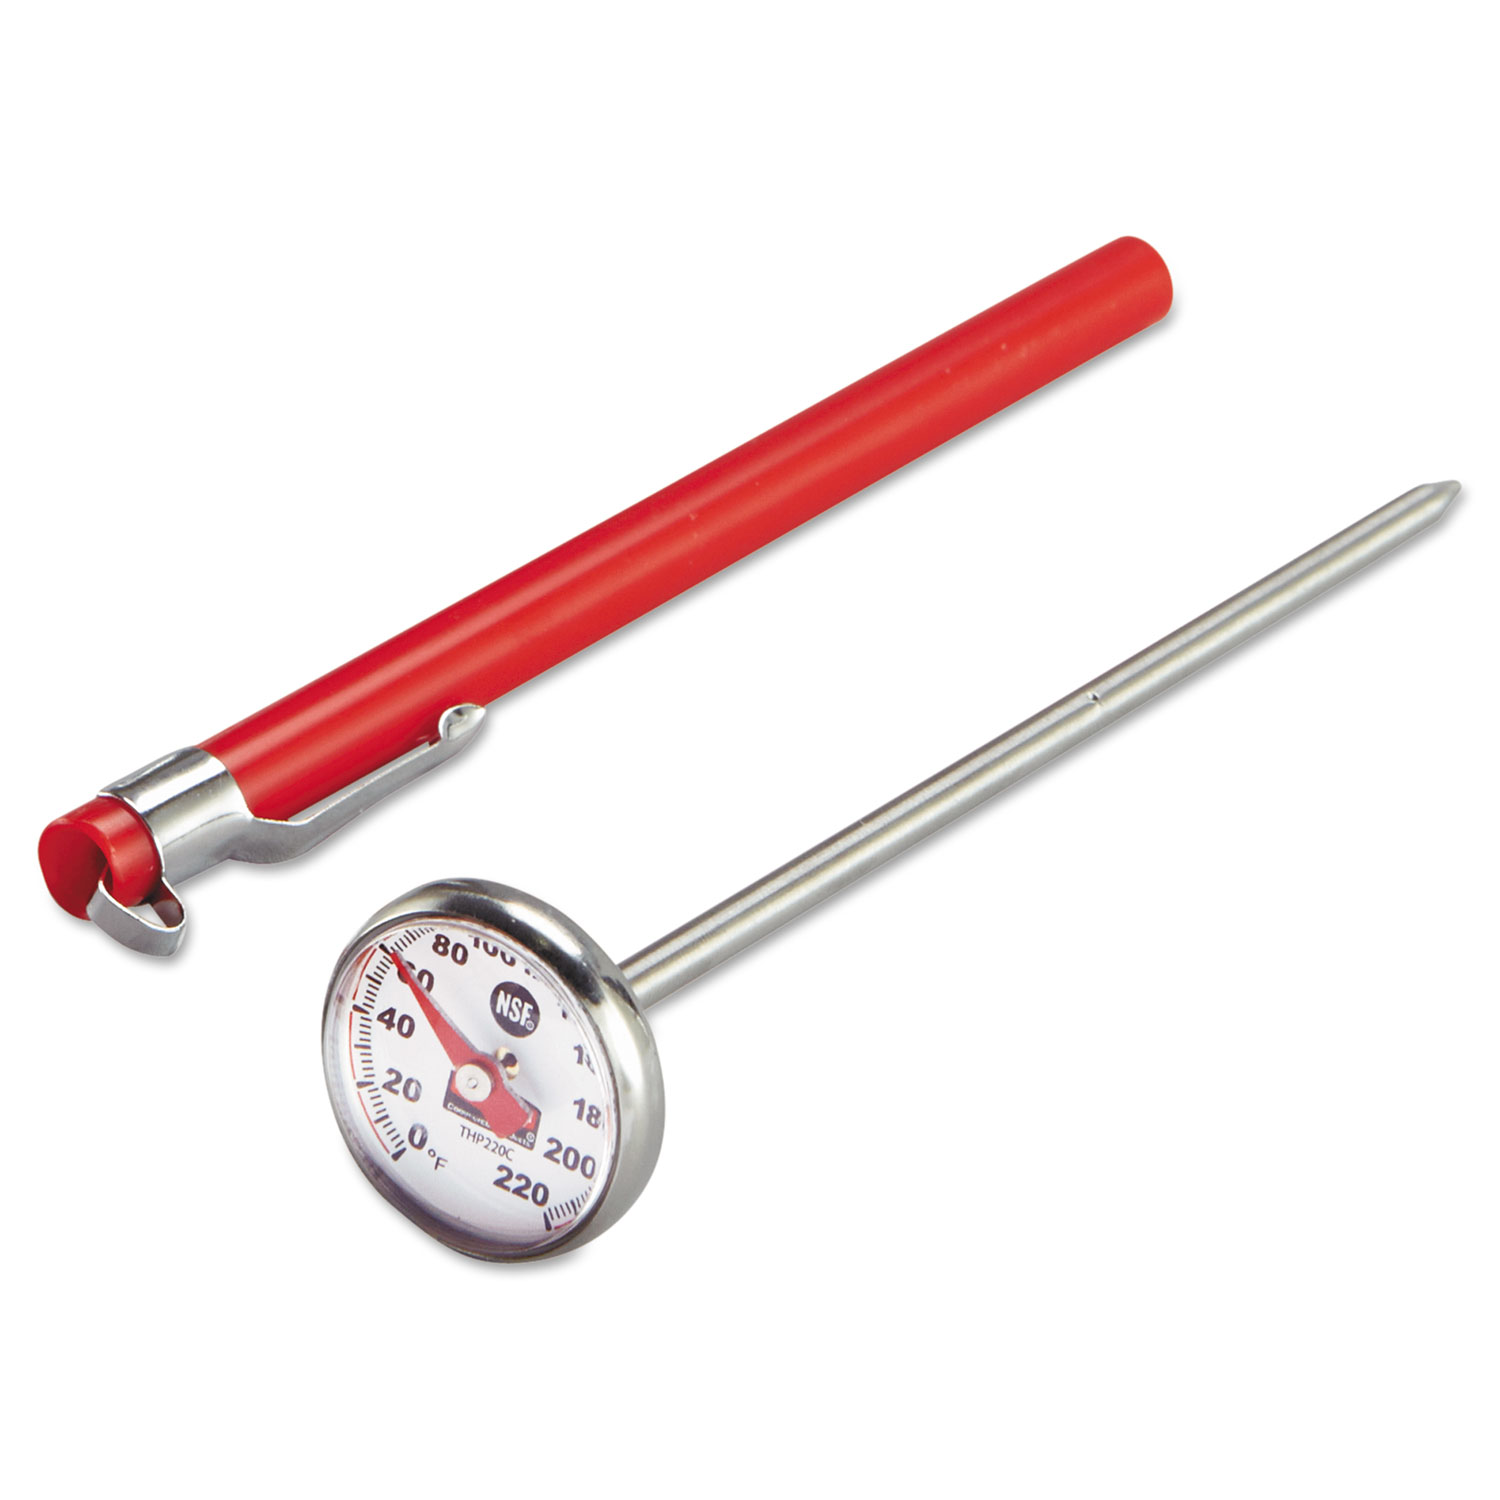  Rubbermaid Commercial FGTHP220C Industrial-Grade Analog Pocket Thermometer, 0°F to 220°F (PELTHP220C) 